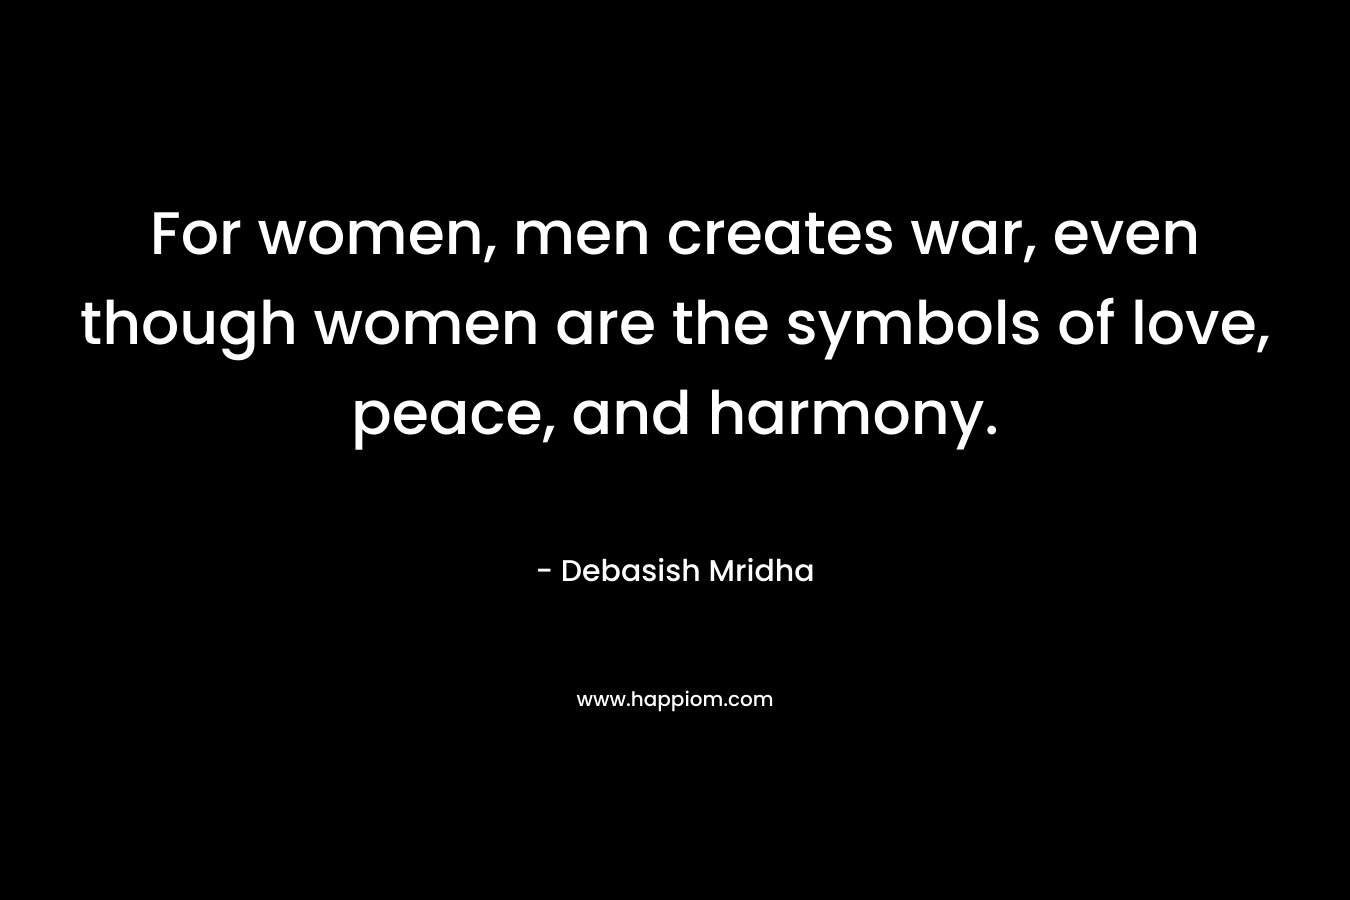 For women, men creates war, even though women are the symbols of love, peace, and harmony. – Debasish Mridha